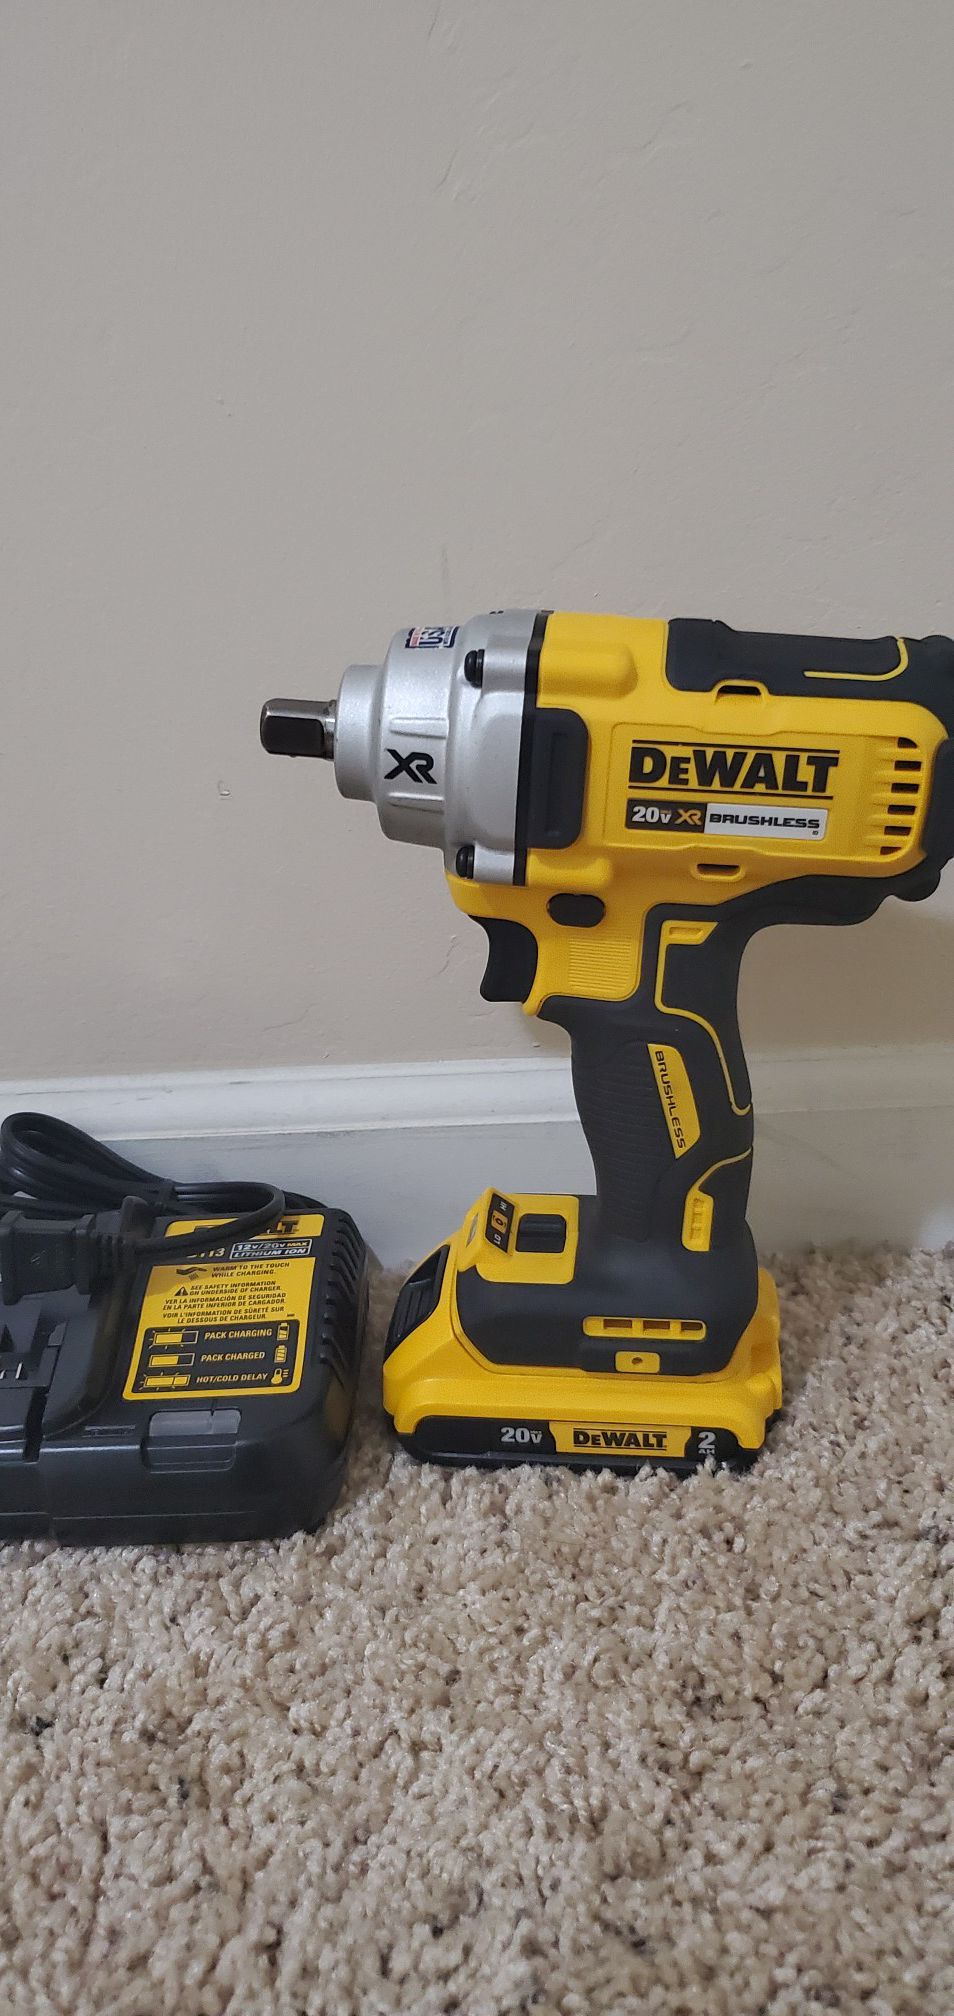 DEWALT 20-Volt MAX XR Lithium-Ion Brushless Cordless 1/2 in. Impact Wrench with Detent Pin Anvil comes with charger and battery